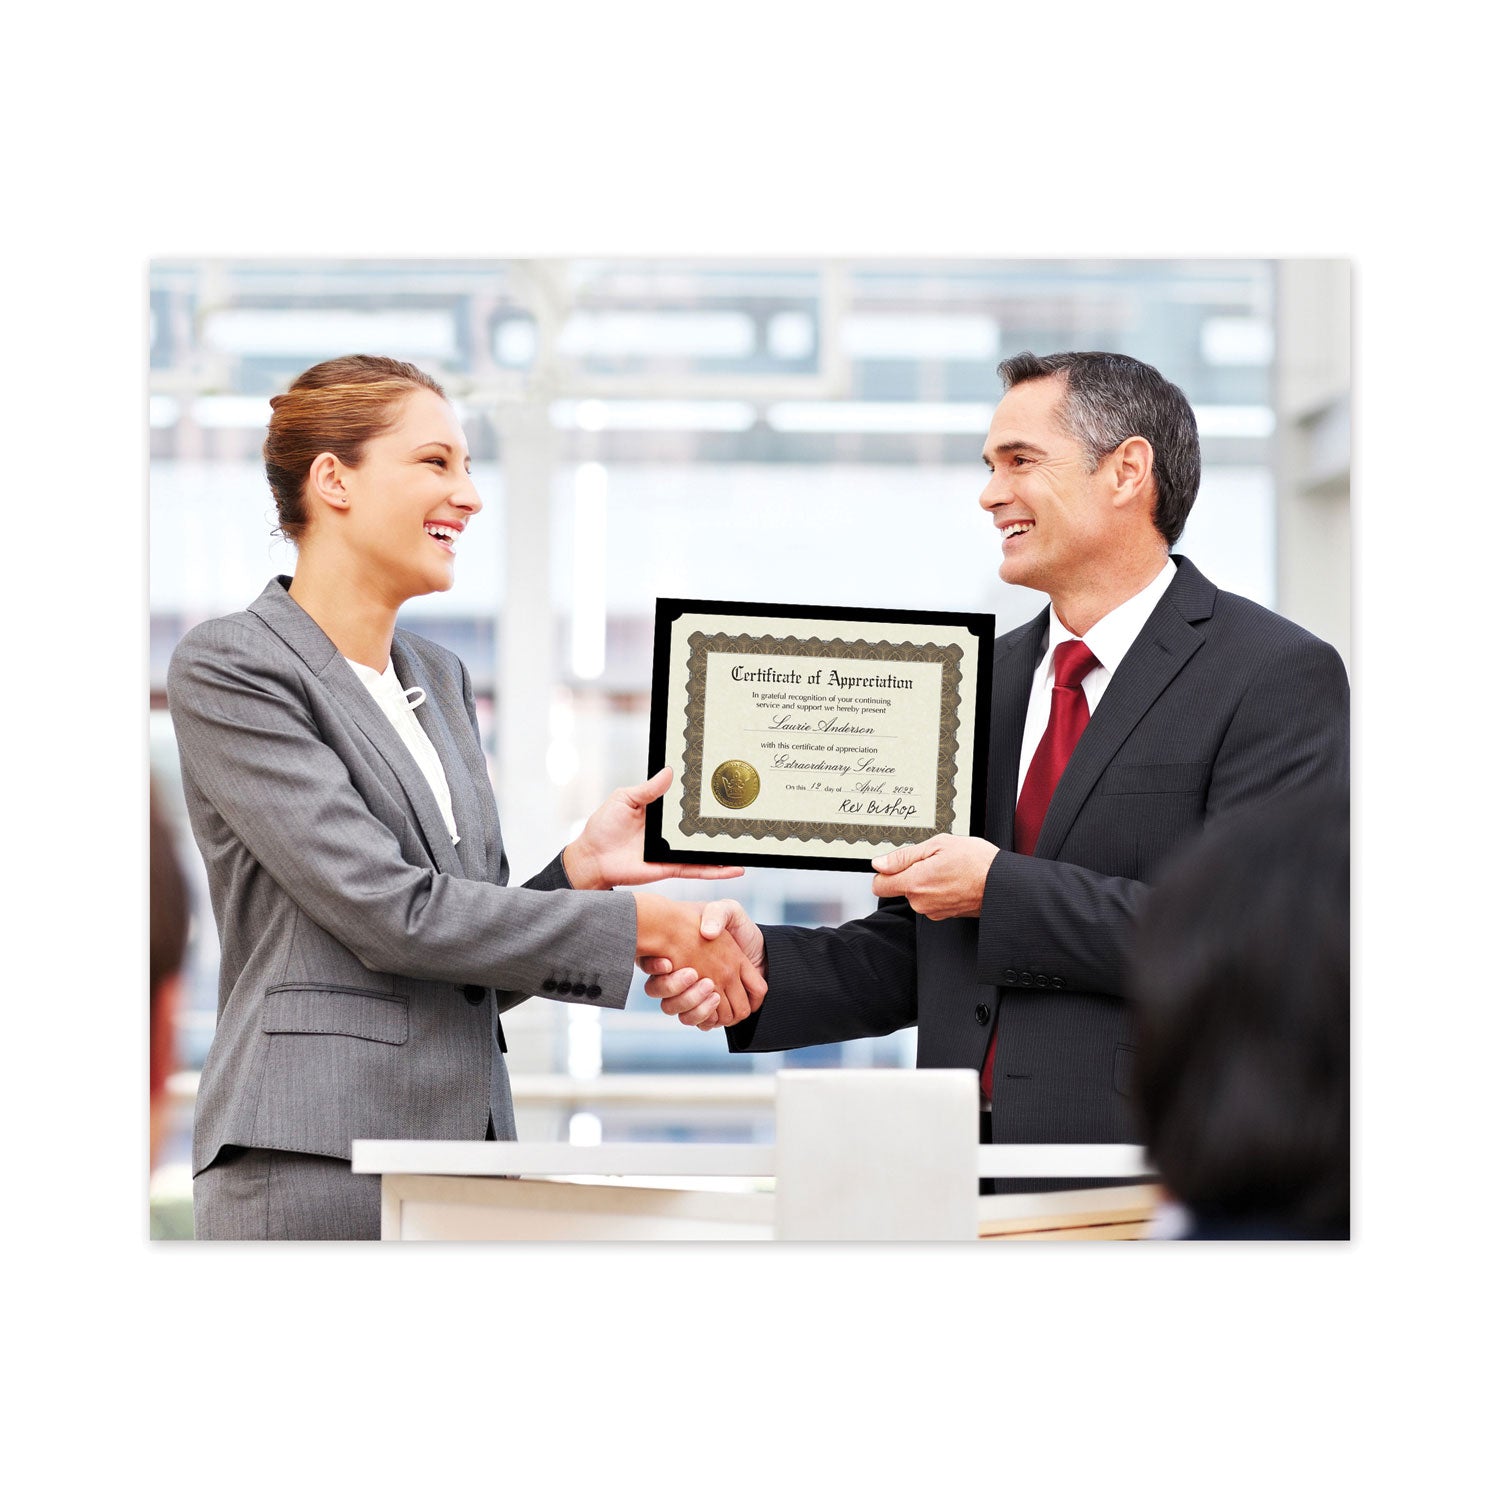 ready-to-use-certificates-appreciation-11-x-85-ivory-brown-gold-colors-with-brown-border-6-pack_cos930000 - 2